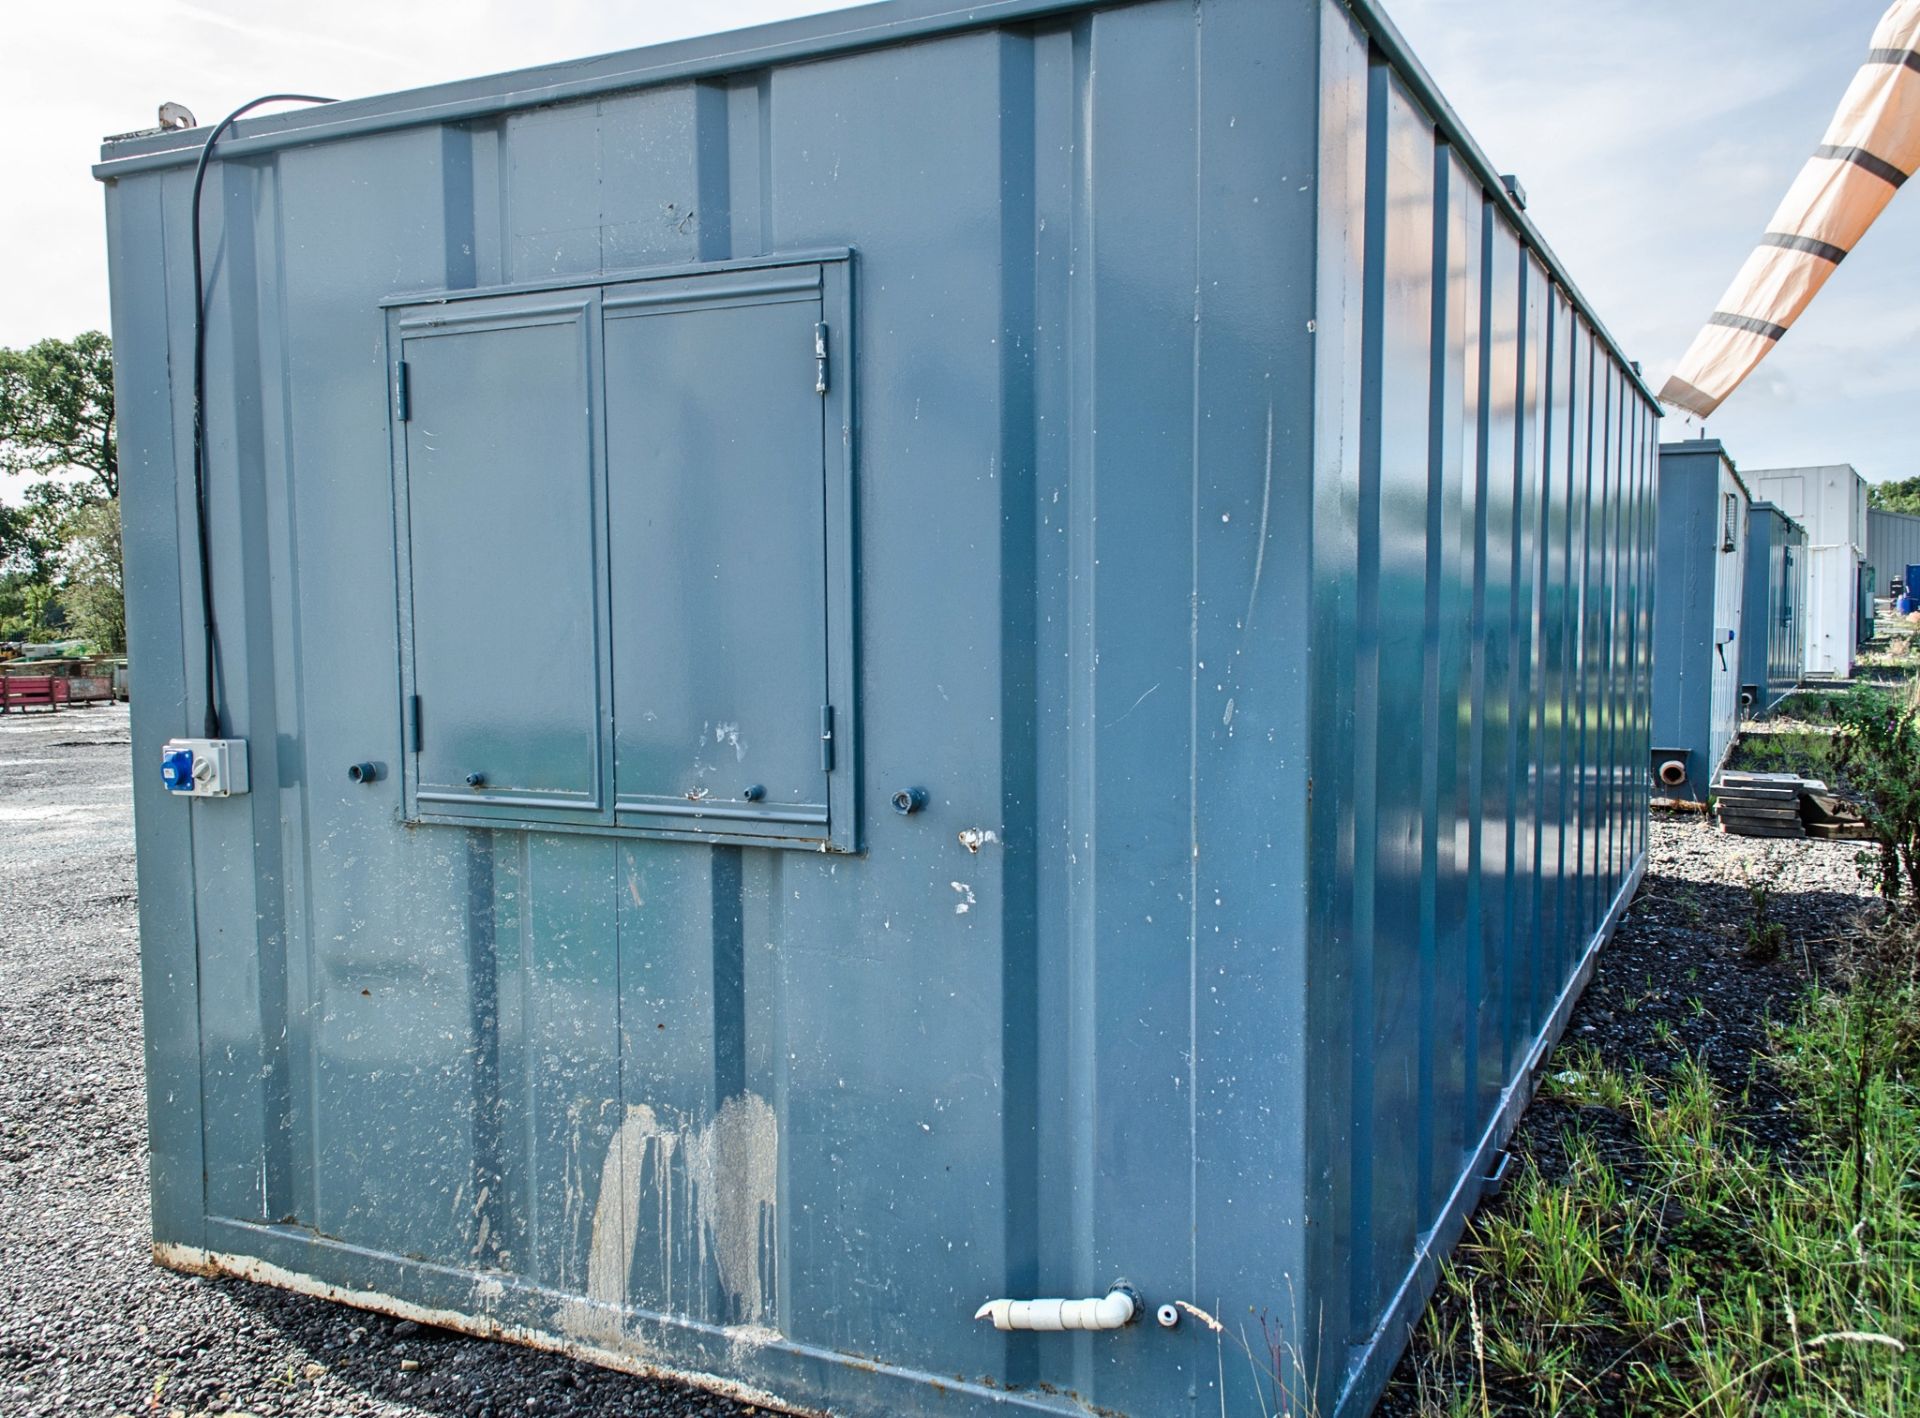 24 ft x 8 ft 6 inch steel anti vandal canteen site unit ** No keys but unlocked ** - Image 4 of 6